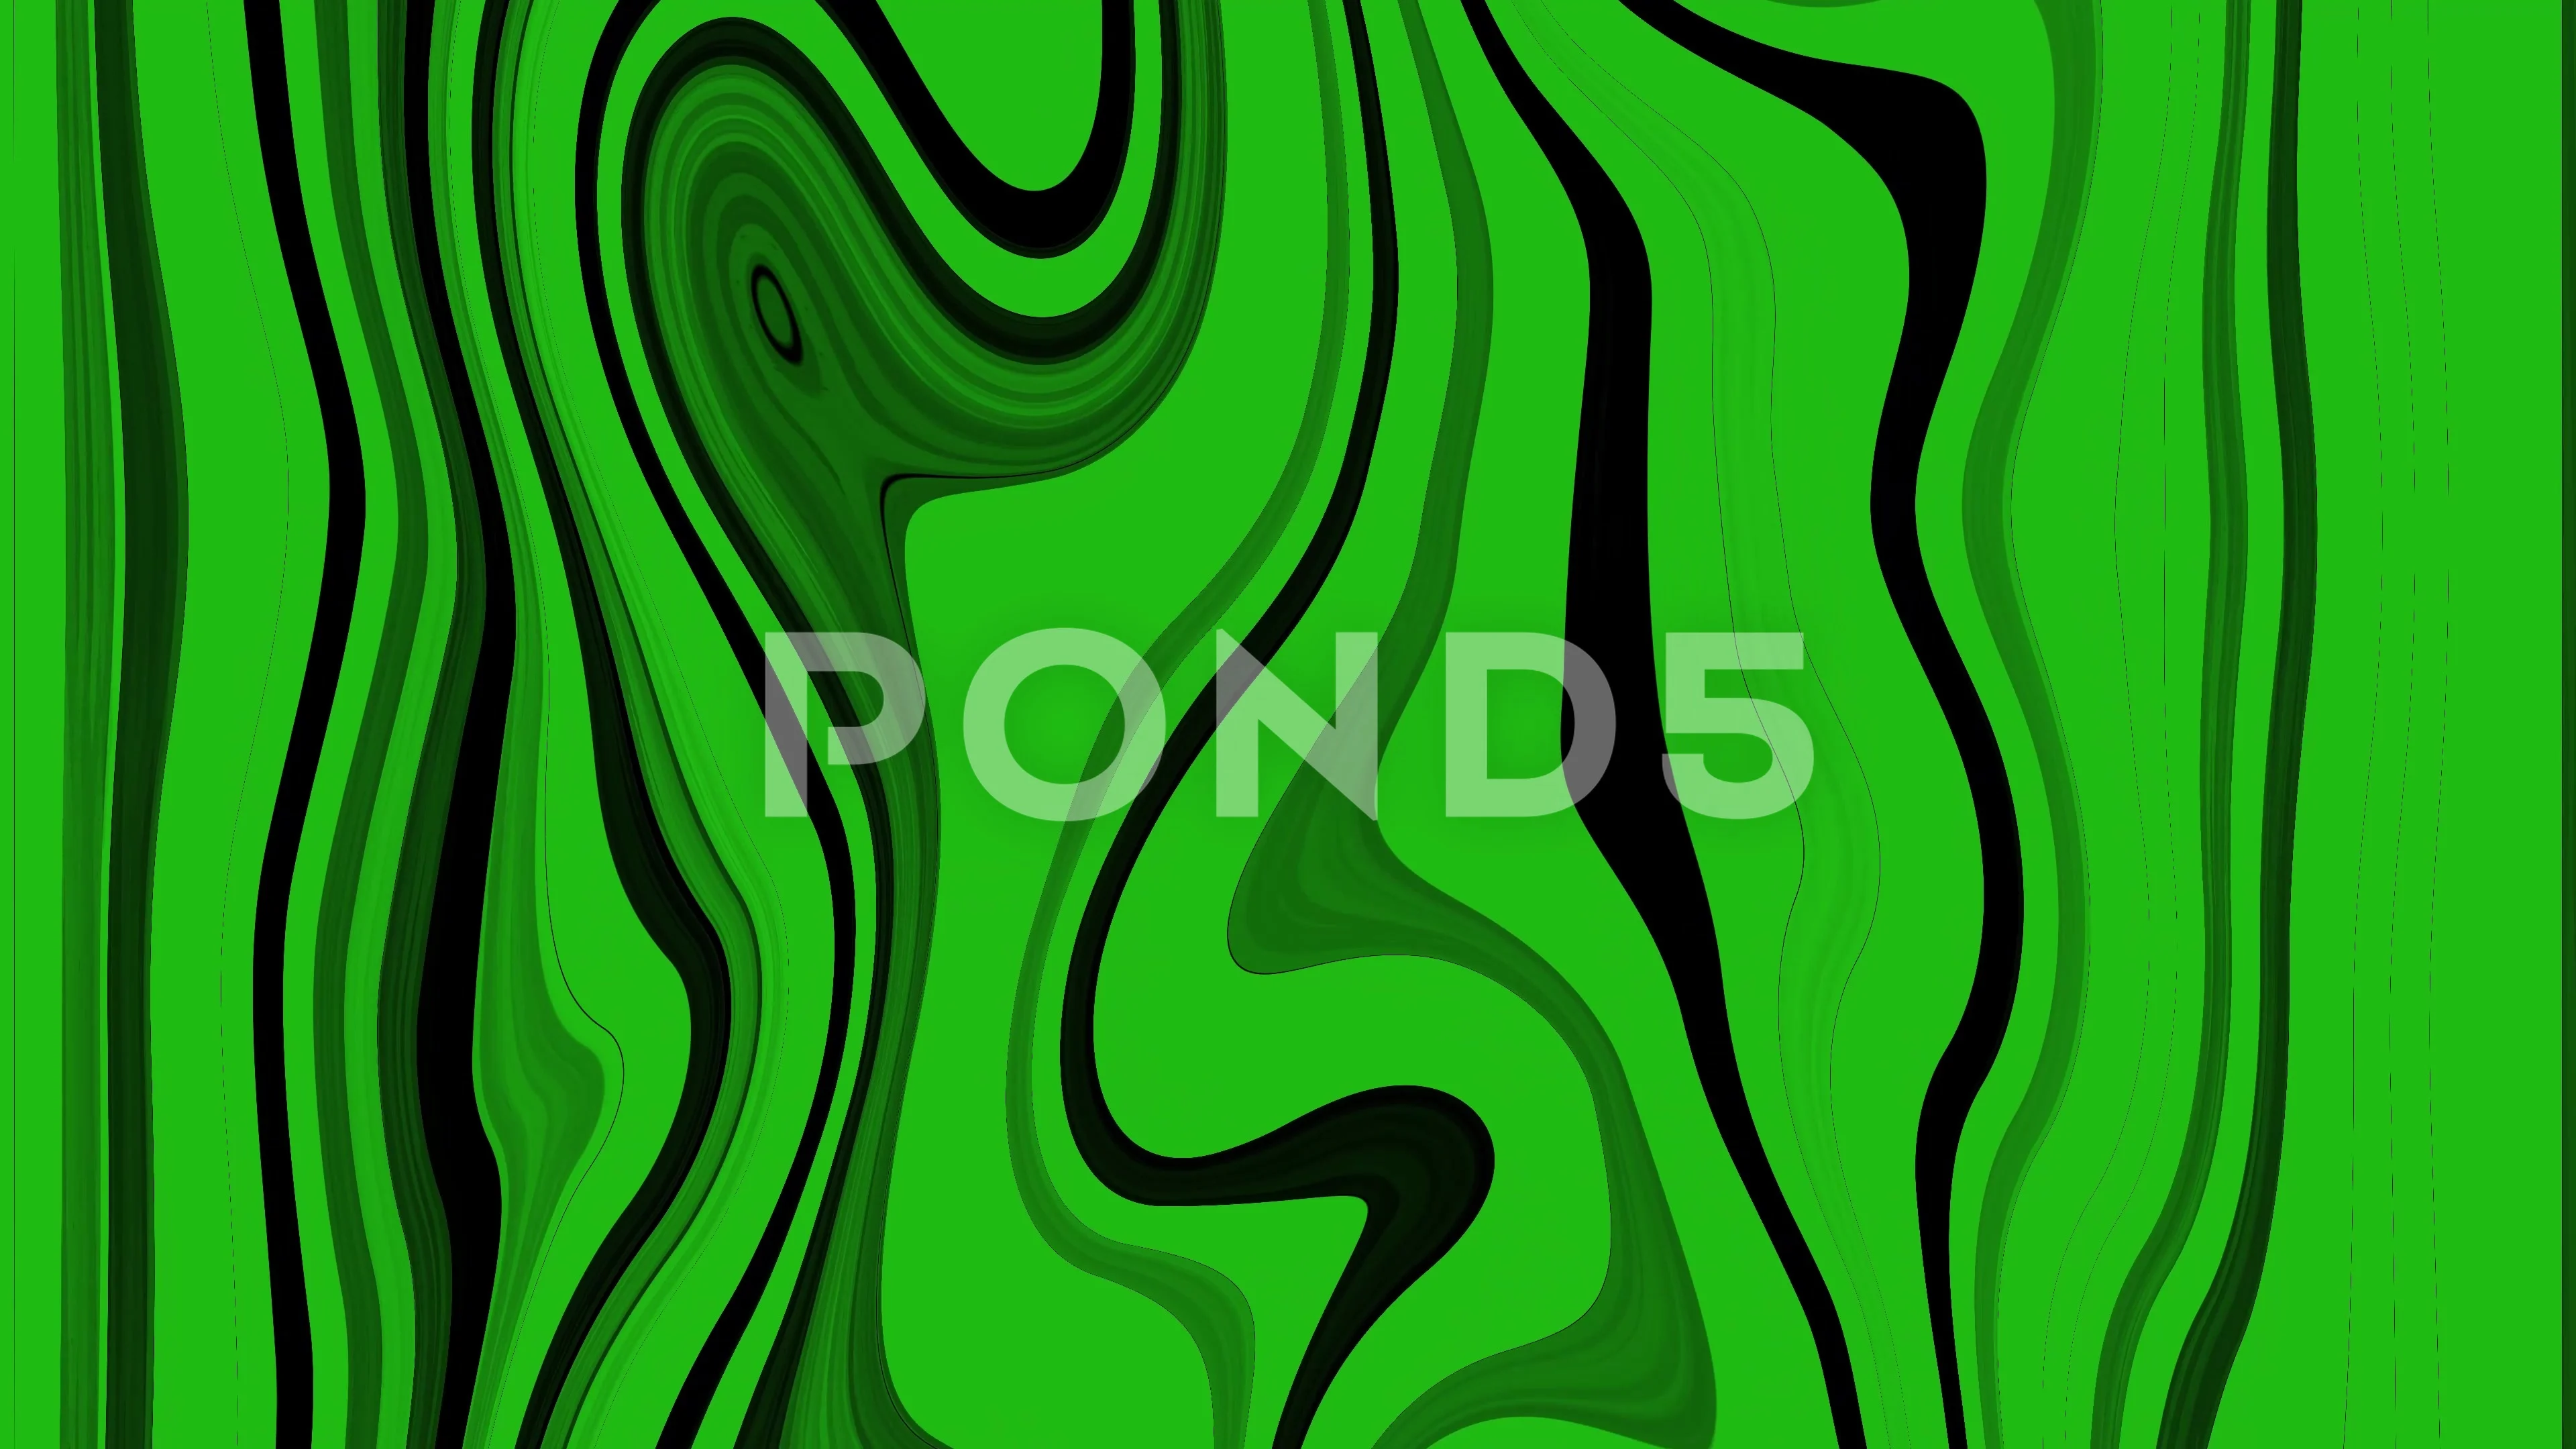 green and black background stripes